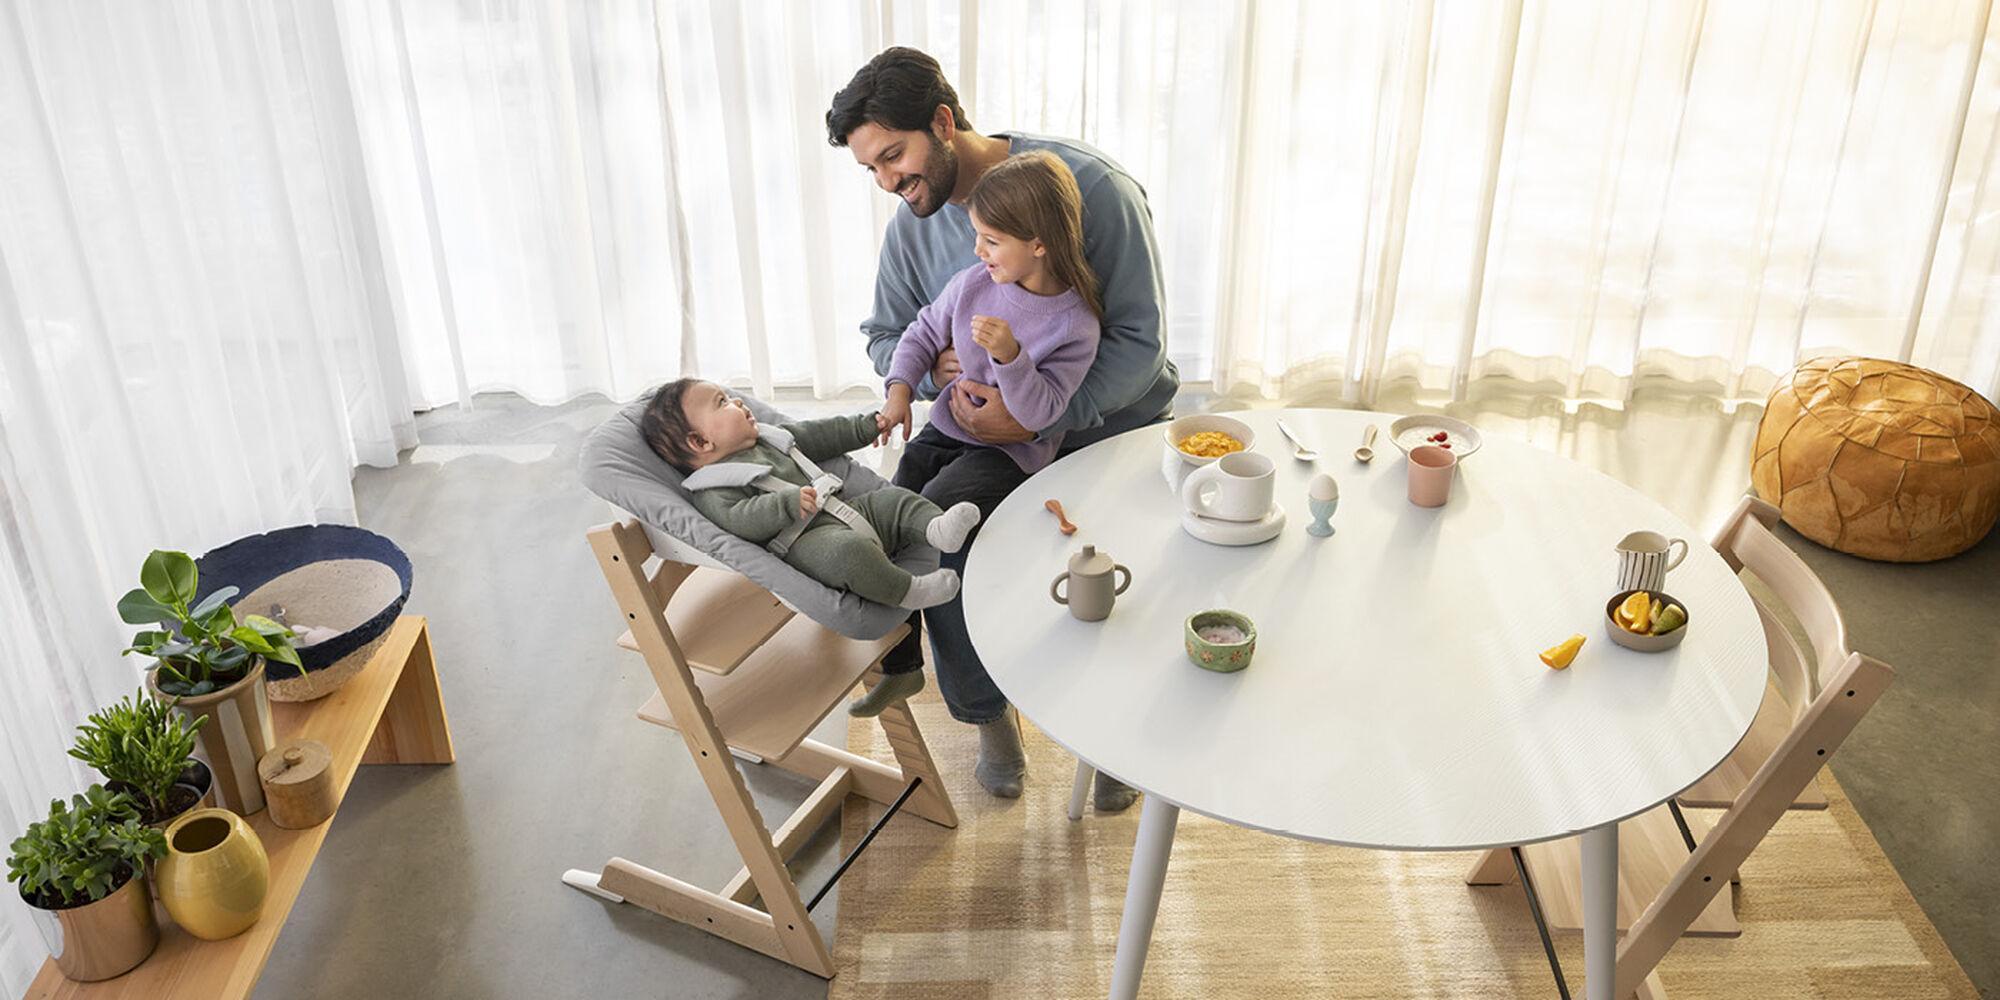 Stokke Tripp Trapp Chair with newborn insert, in a well lit room with a baby inside the chair and a father holding an older kid happily playing with the younger one.